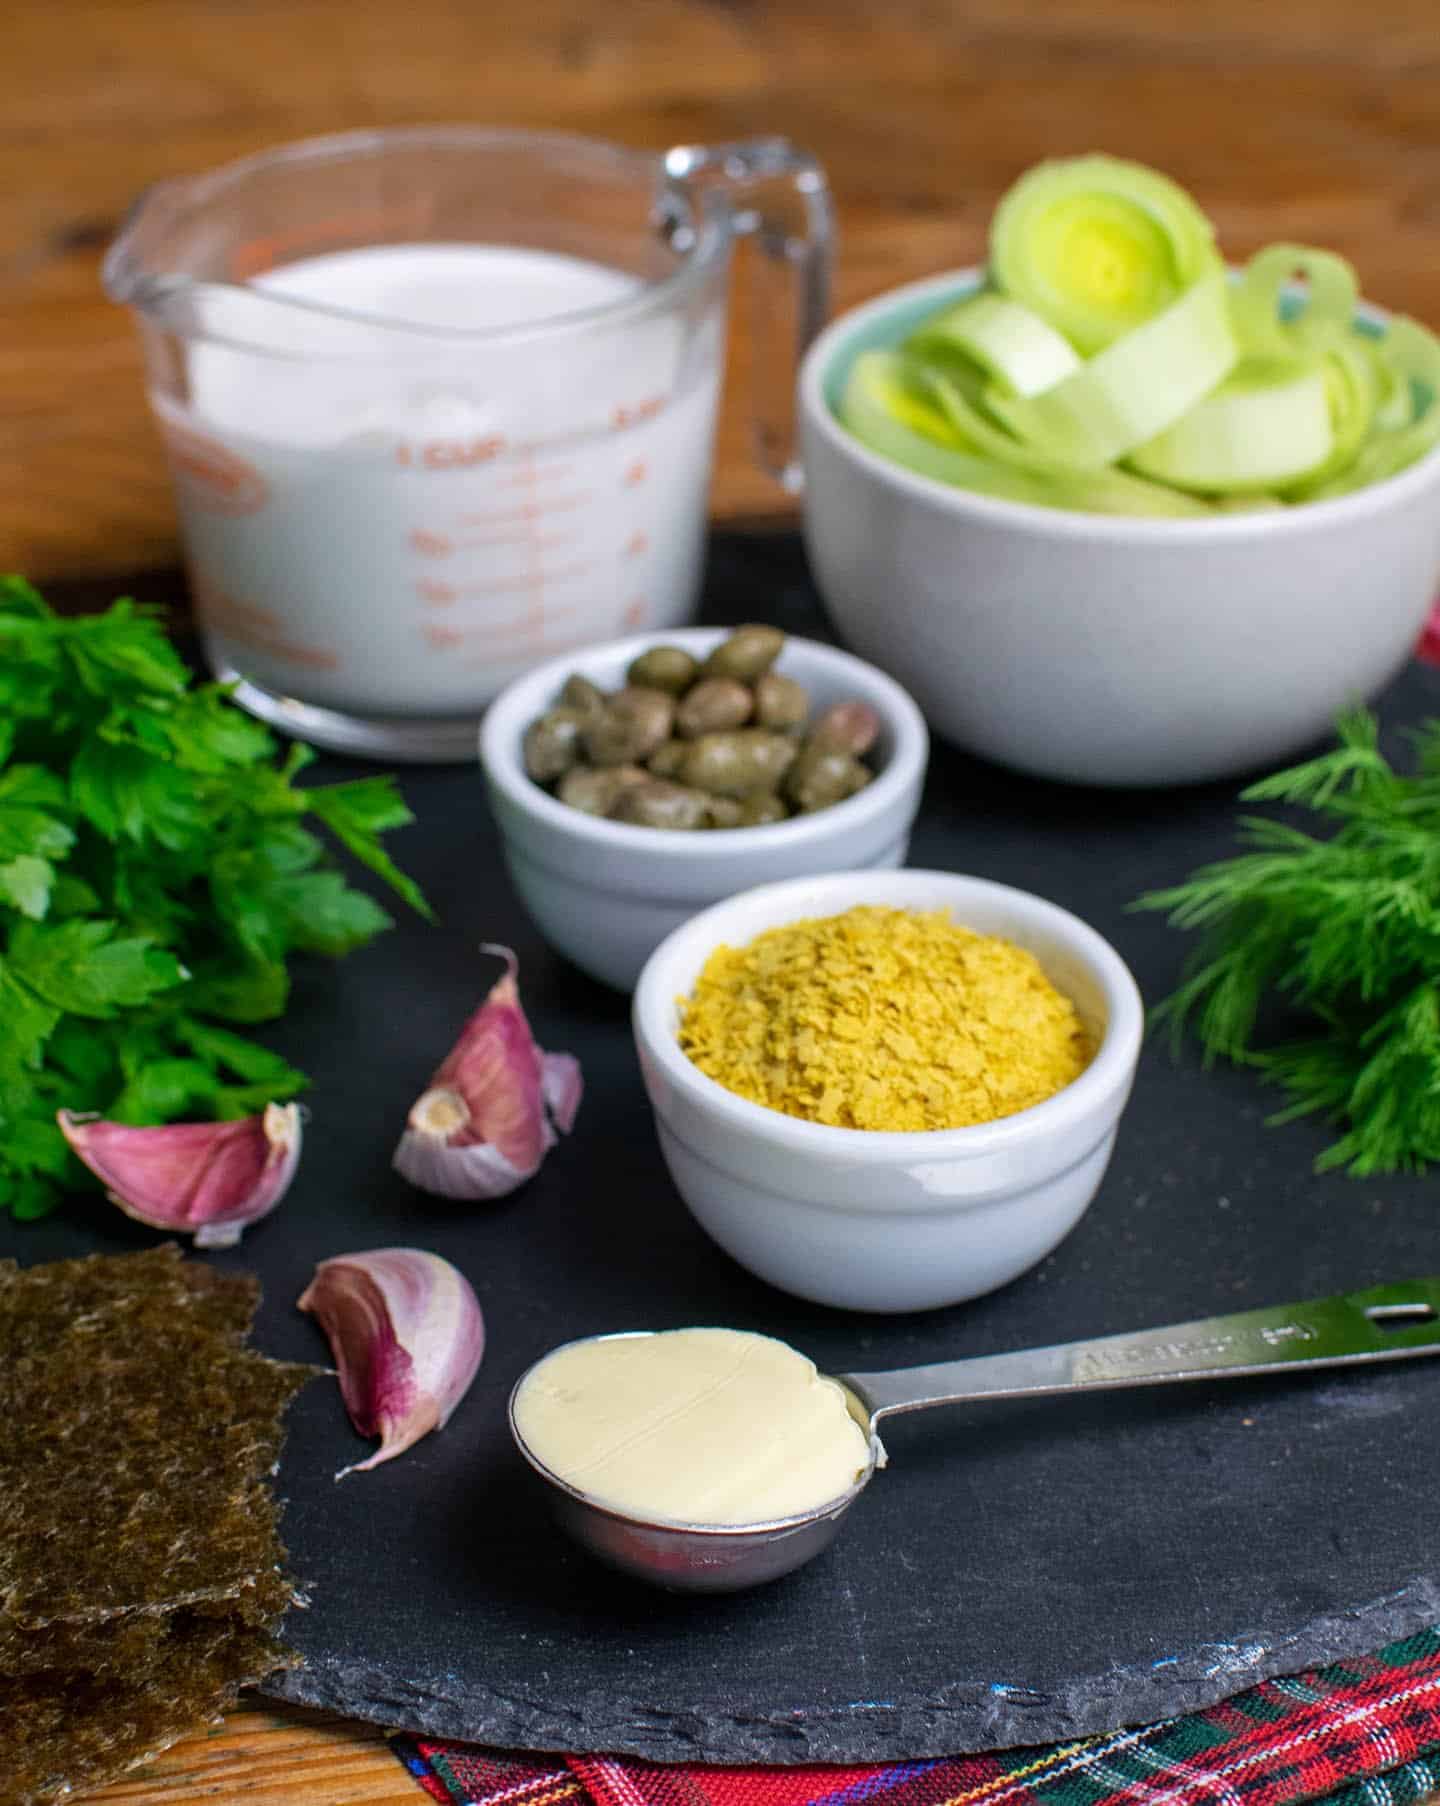 A round slate board with small pots of nutritional yeast, capers and leeks. A tablespoon is full of vegan butter, cloves of garlic, parsley and dill also visible. 